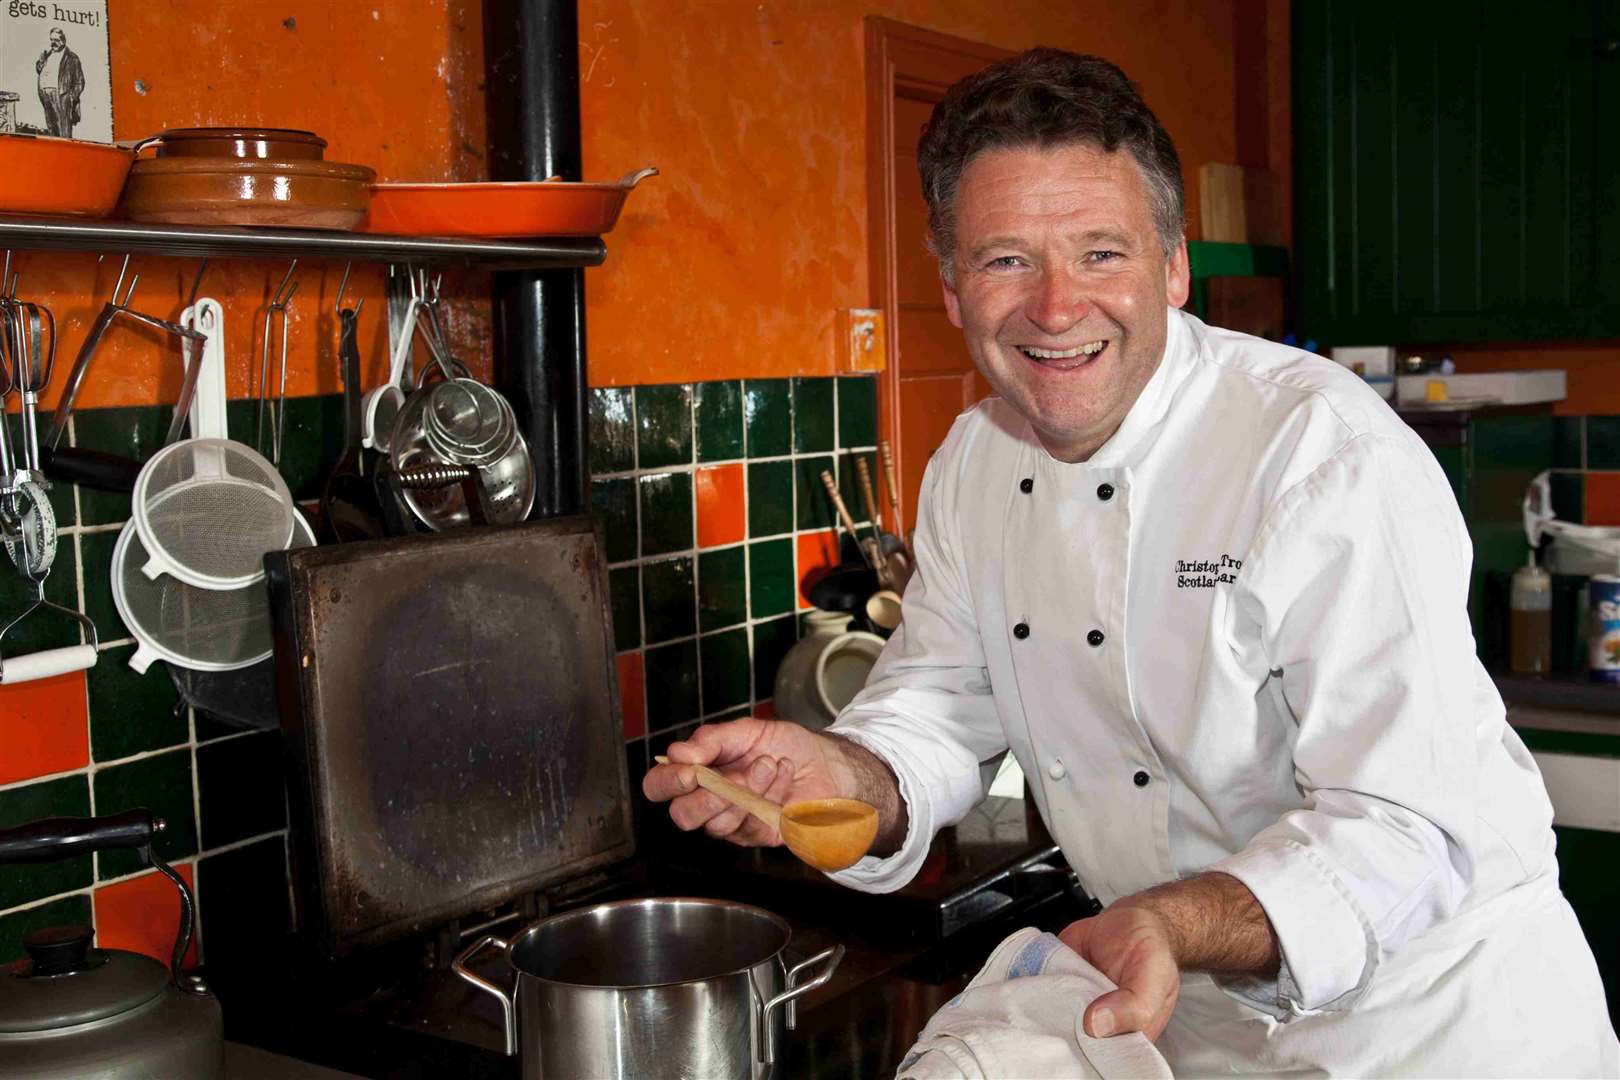 Food Theatre will feature demonstrations from professional chef and presenter Christopher Trotter